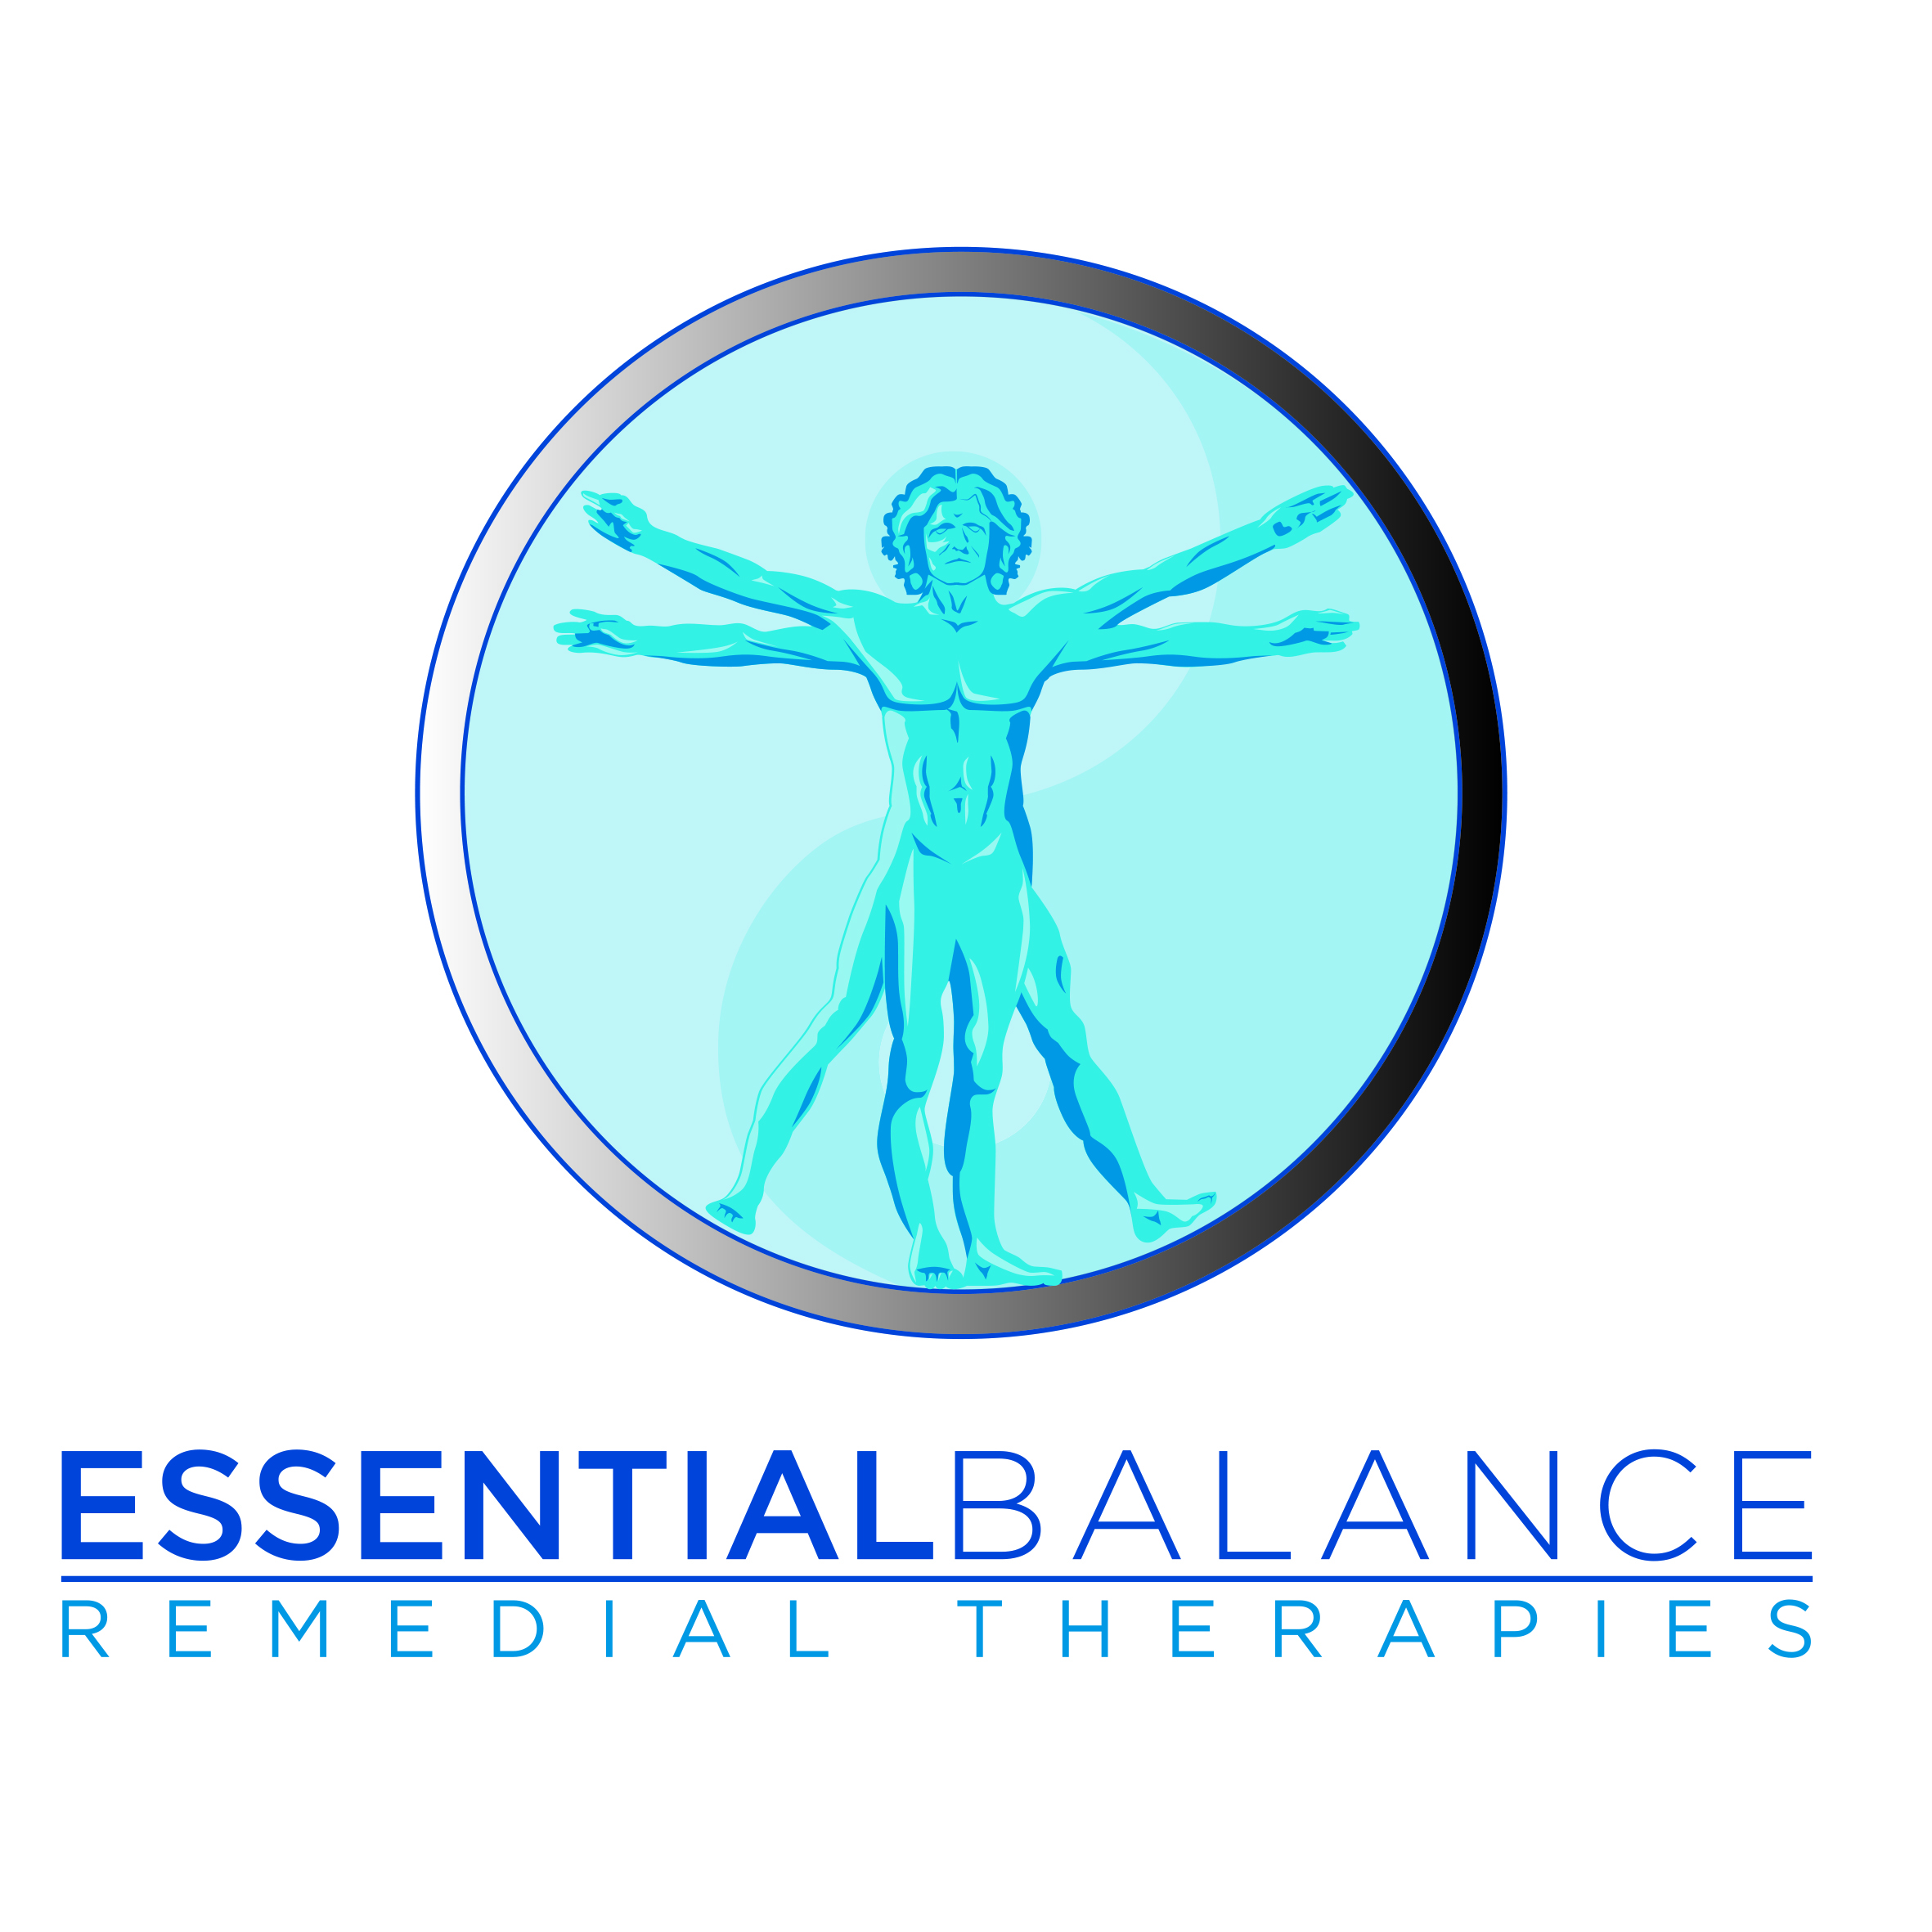 Essential Balance Remedial Therapies